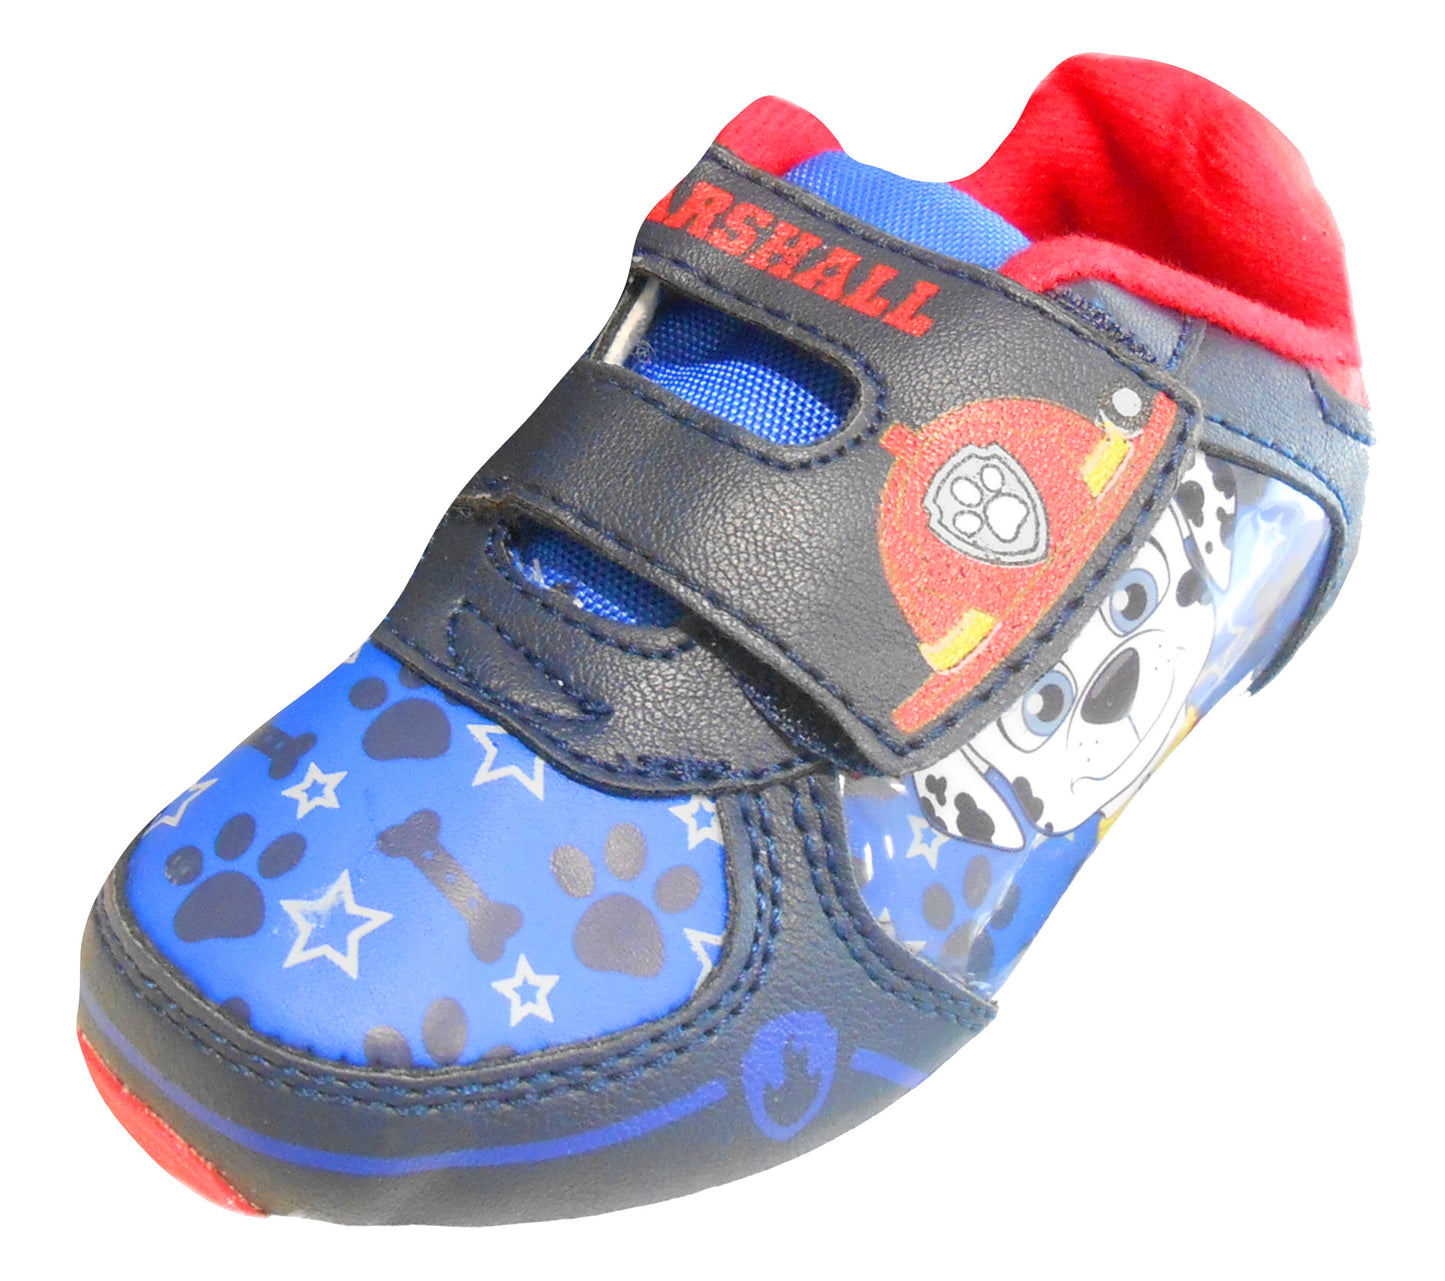 Paw Patrol Marshall & Chase Trainer Shoes